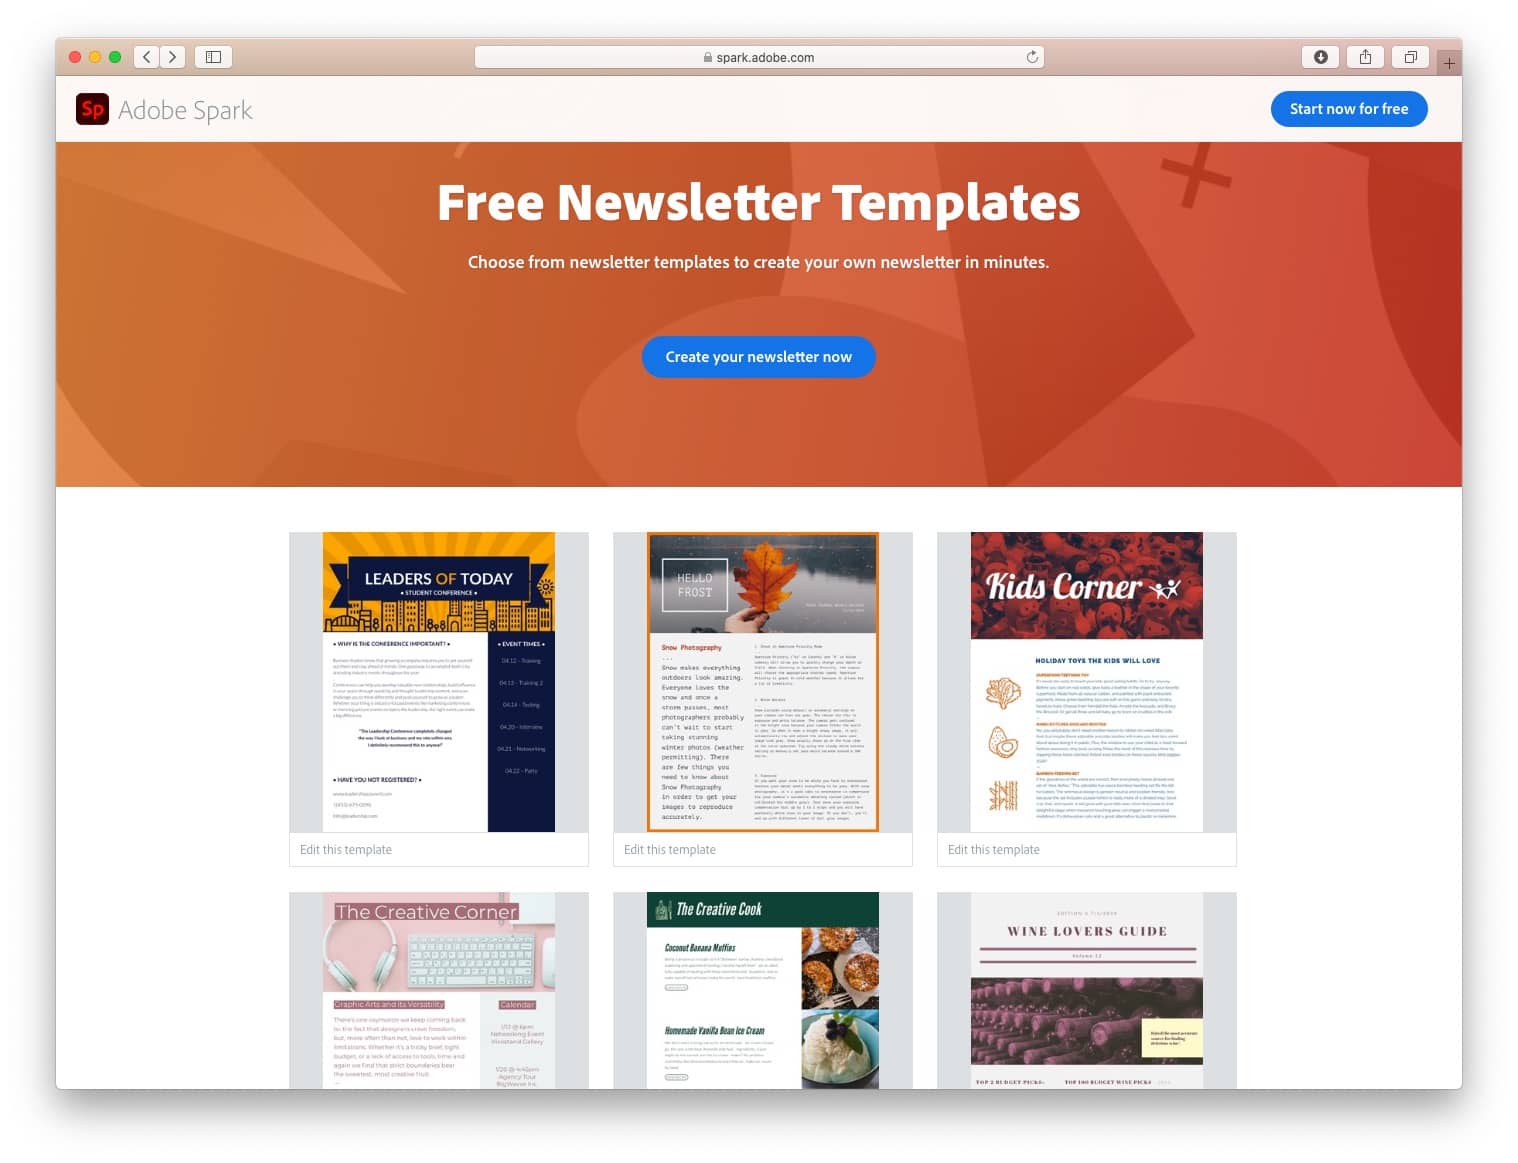 Free email newsletter templates: Adobe Spark